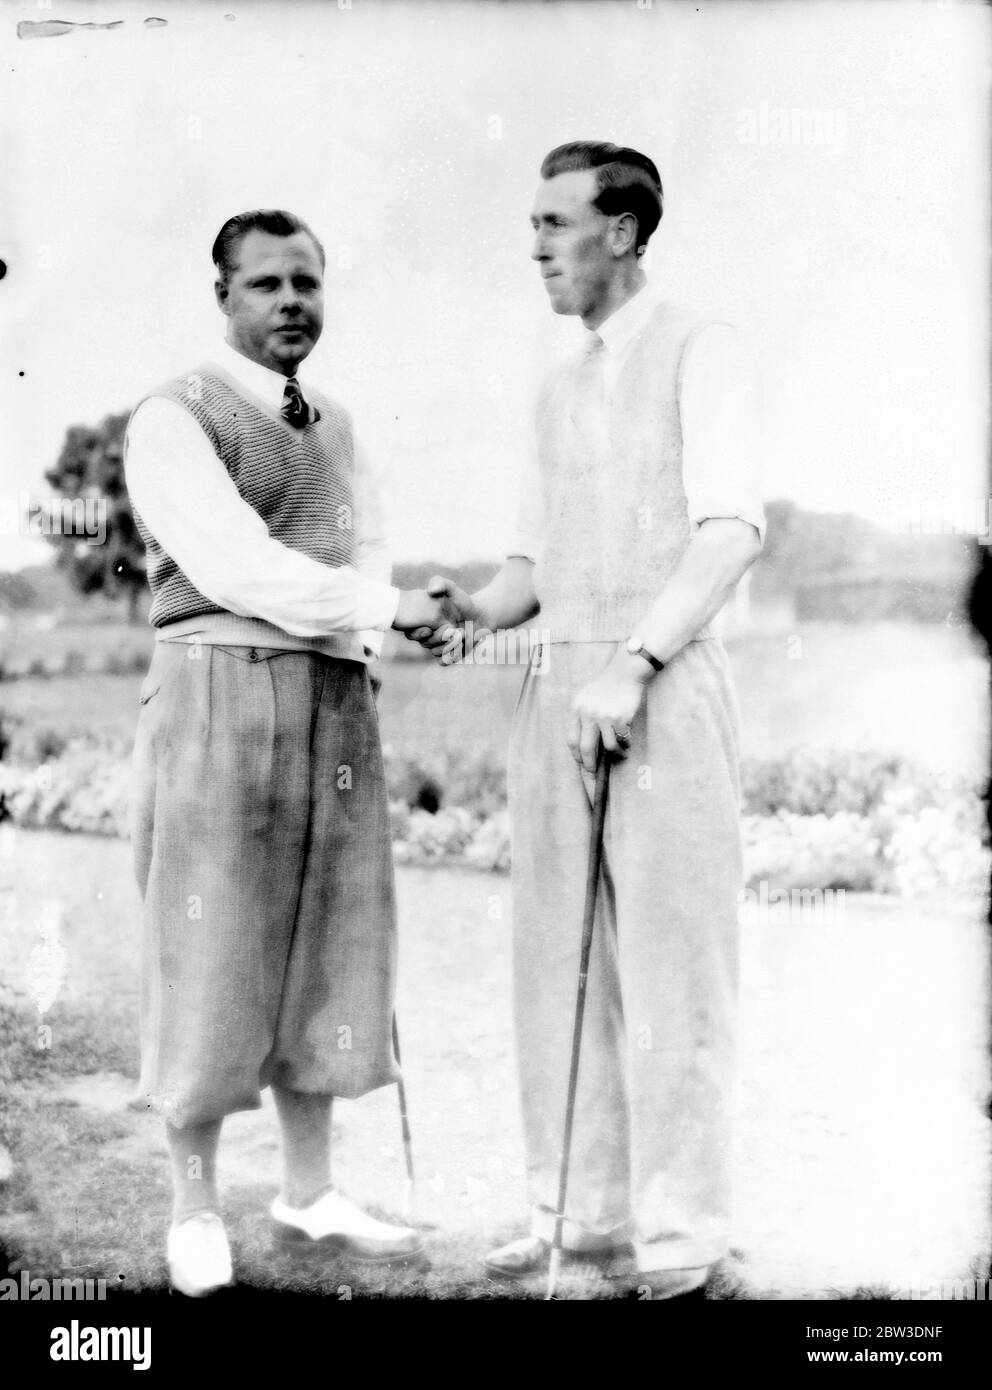 Percy Alliss and A H Padgham finalists in £1,250 golf tournament . Members of Ryder Cup team . Percy Alliss ( left ) and A H Padgham, the finalists , exchanging mutual congratulations . 12 September 1935 Stock Photo